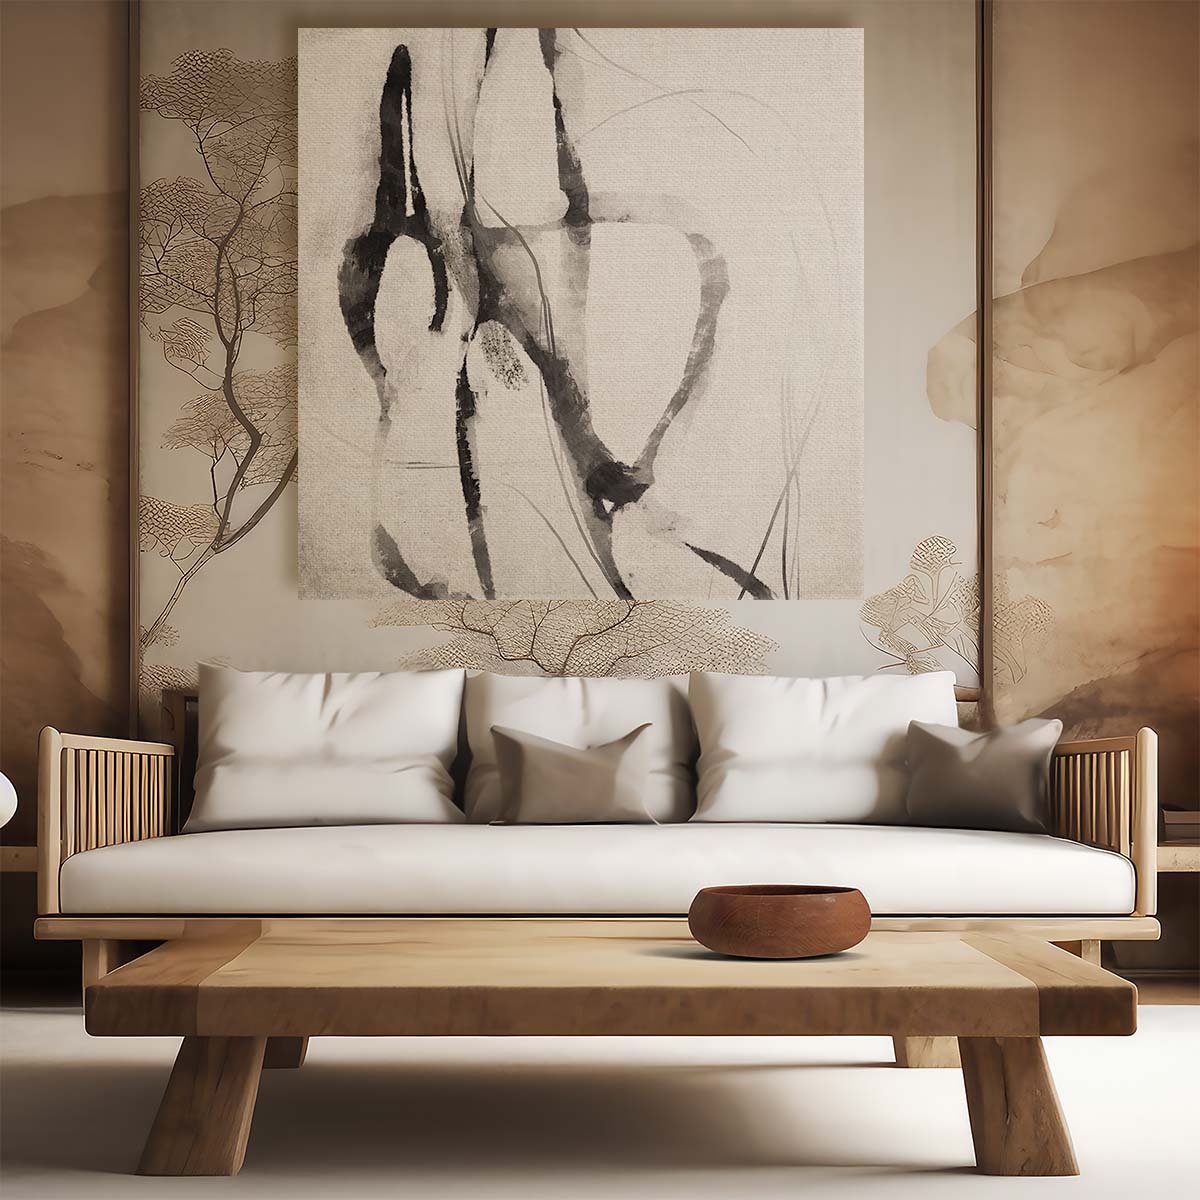 Dan Hobday Modern Minimalist Abstract Styled Illustration Wall Art by Luxuriance Designs. Made in USA.